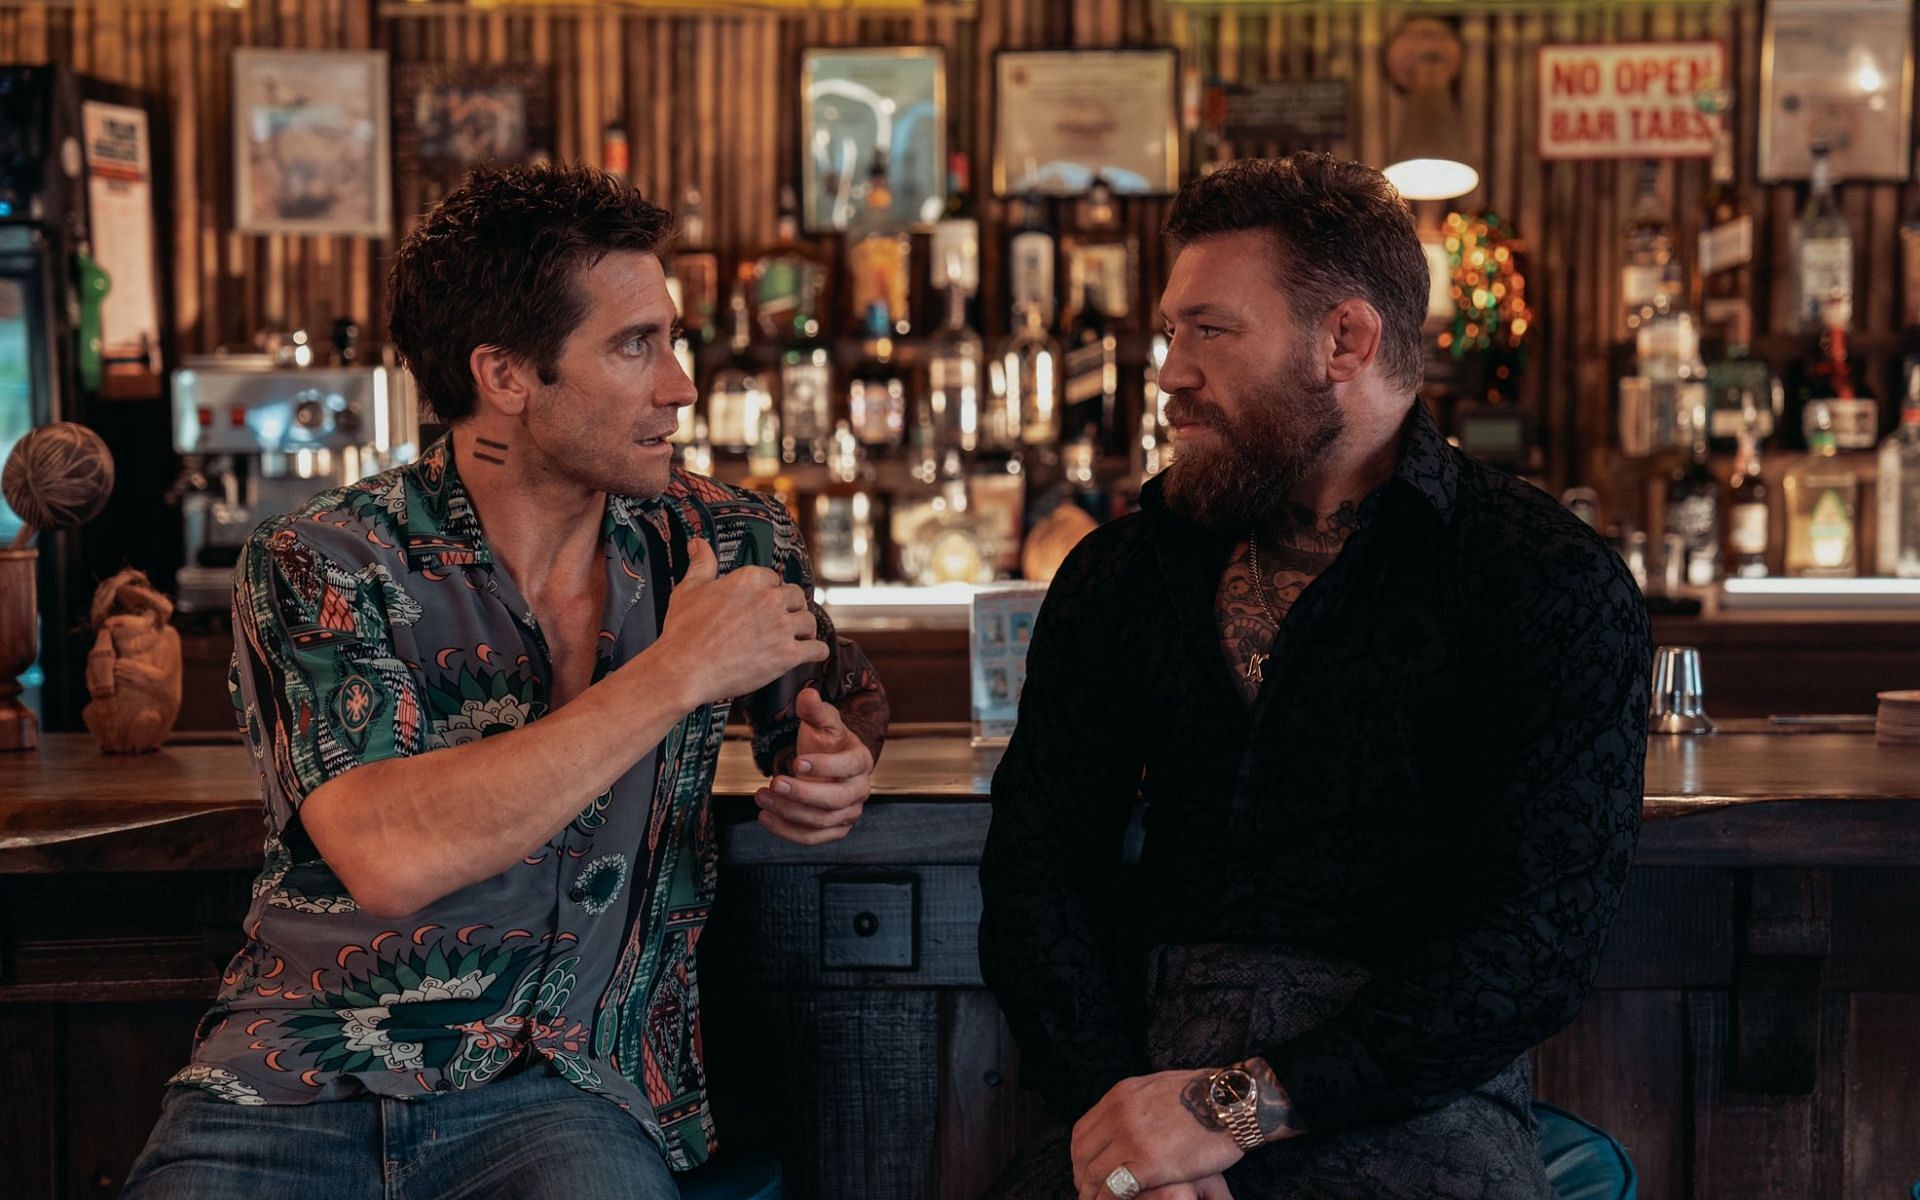 Jake Gyllenhaal (left) and Conor McGregor on the sets of 